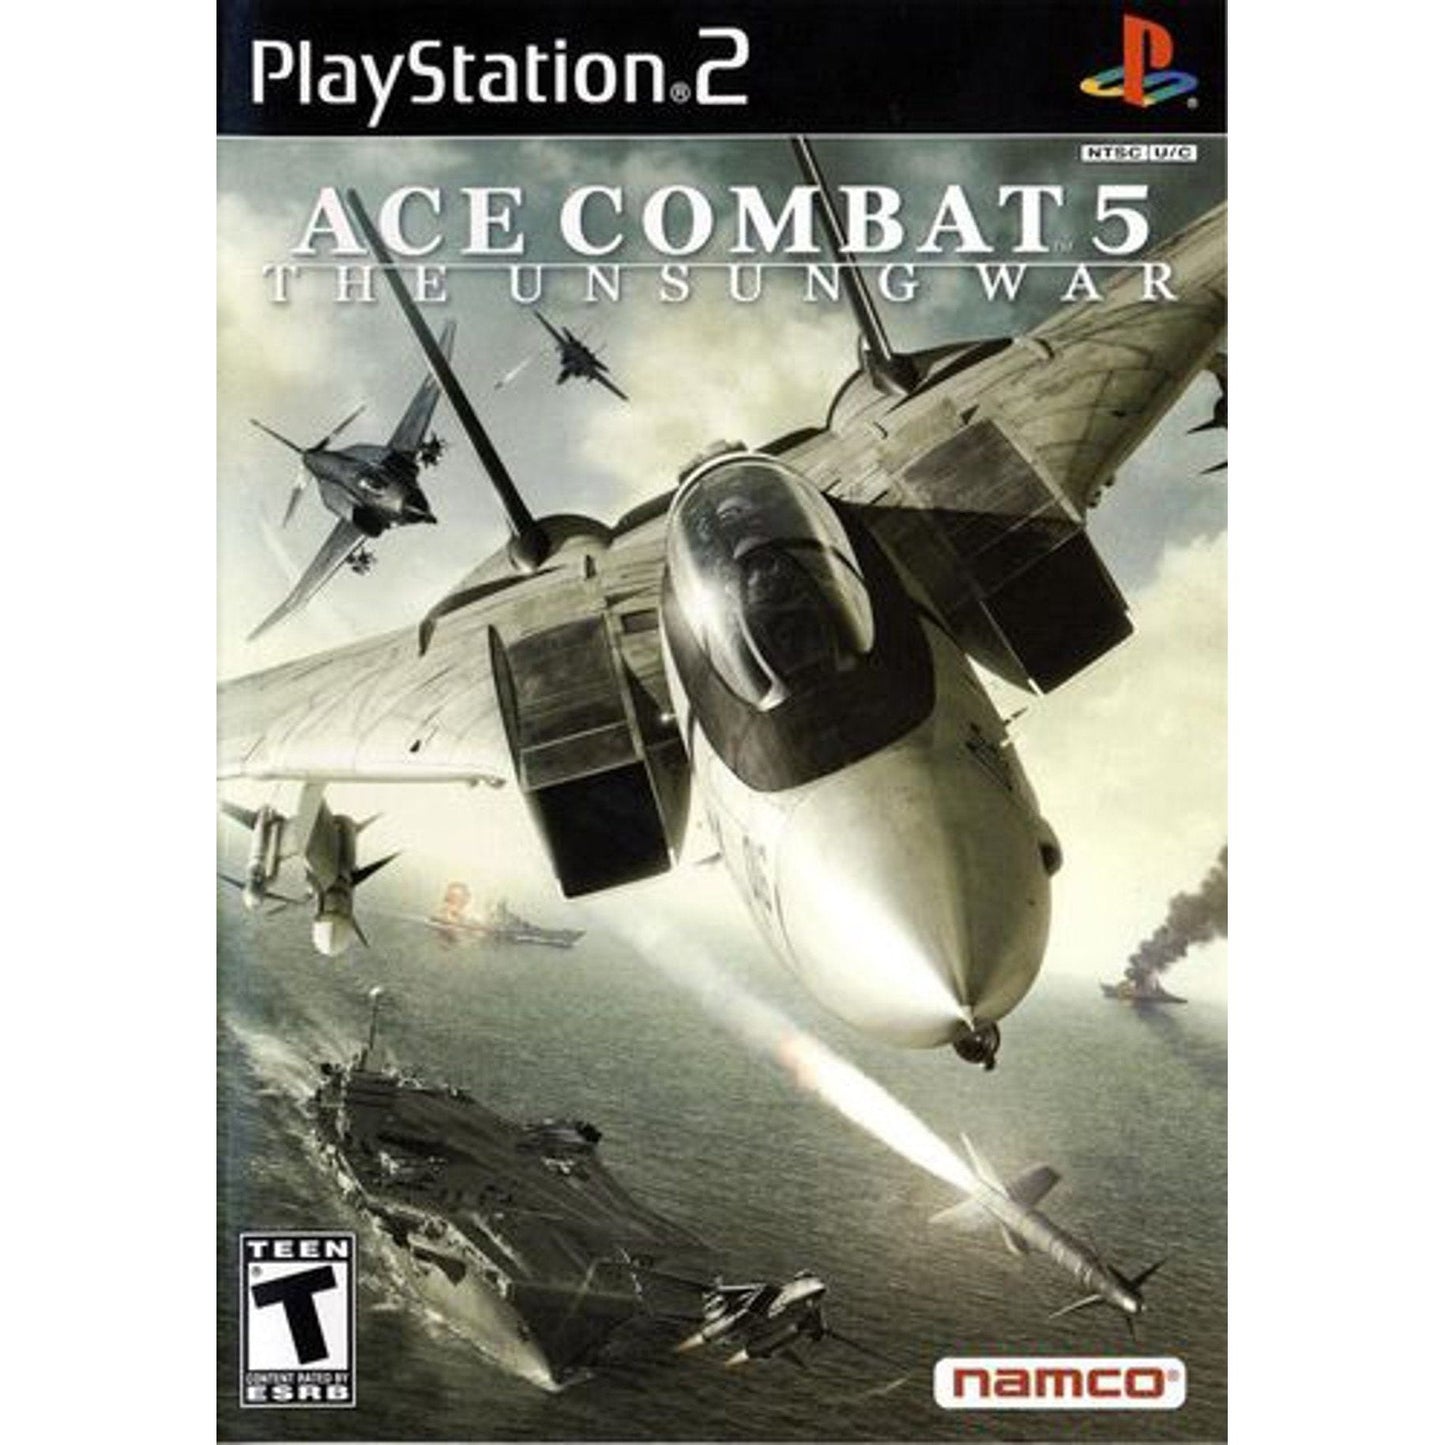 Ace Combat 5 The Unsung War Sony PlayStation 2 PS2 Game from 2P Gaming